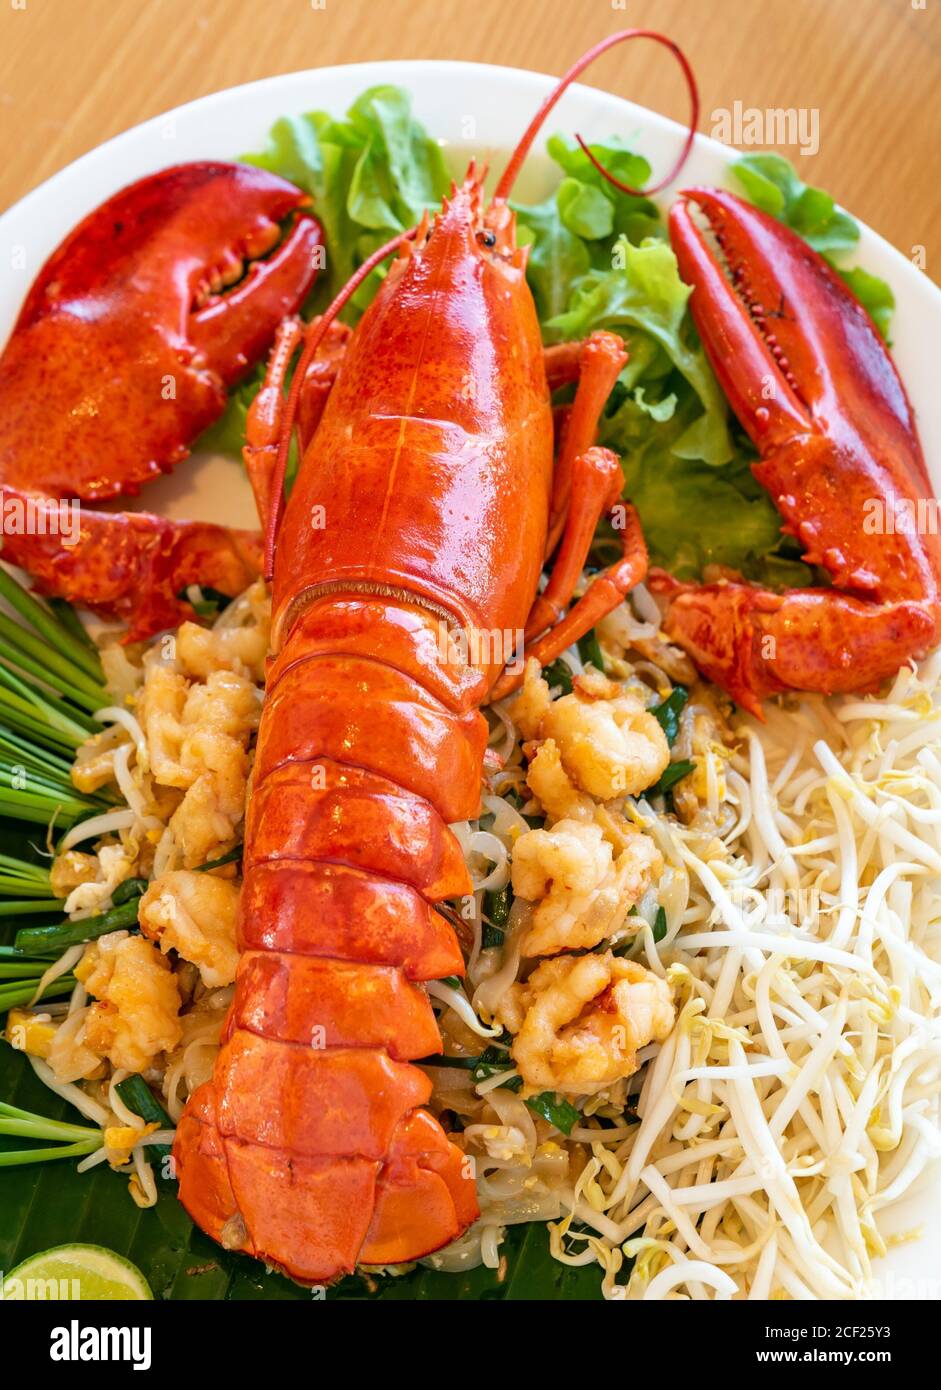 Lobster Pad thai, stir fried Thai rice noodle pasta with whole lobster ...